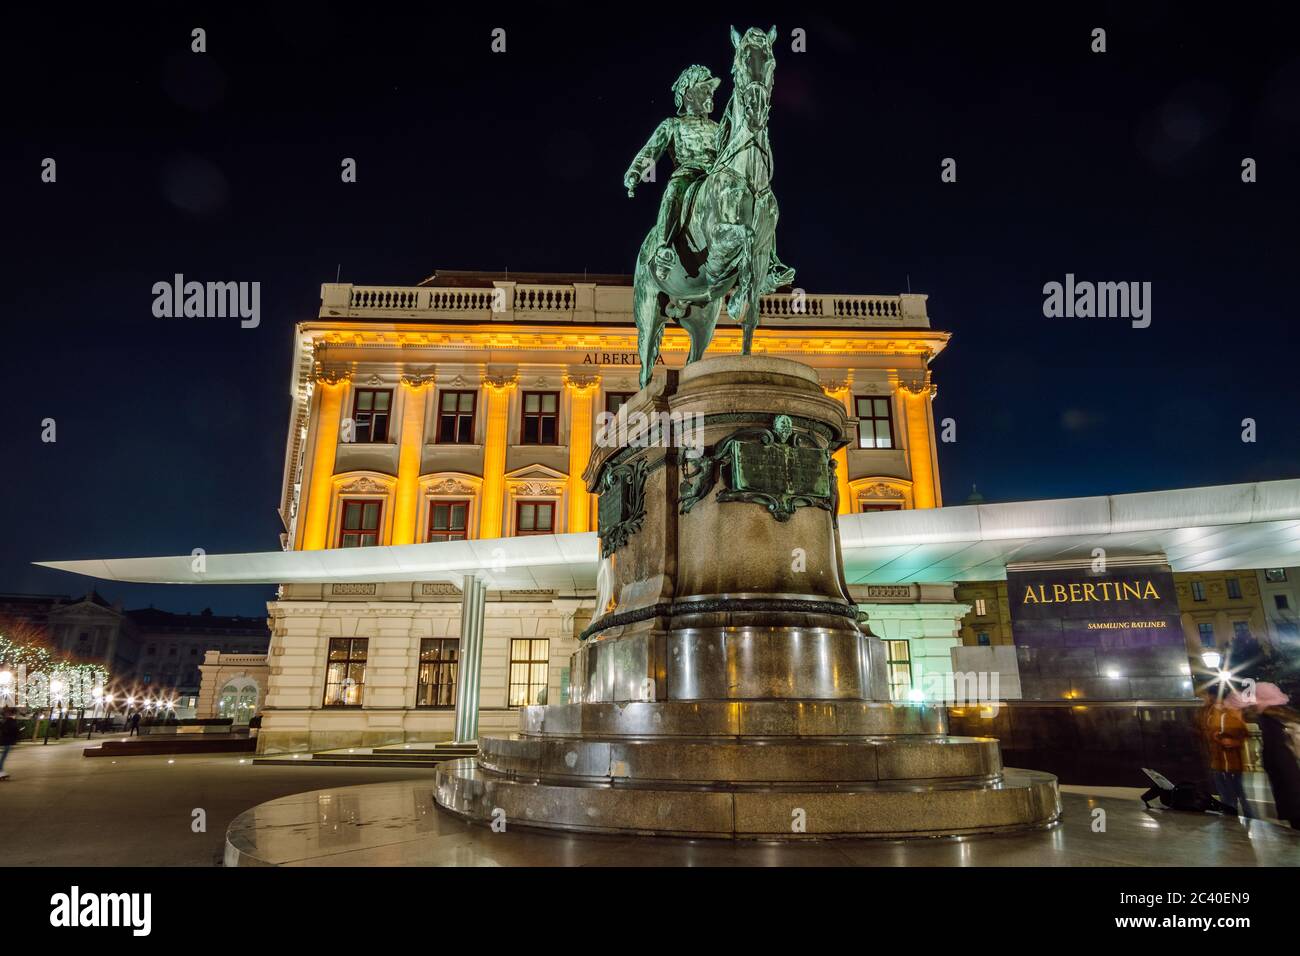 Night view of the Albertina Museum, Vienna. Equestrian statue of Archduke Albert in front of the Albertina Museum at night, Vienna, Austria. Stock Photo